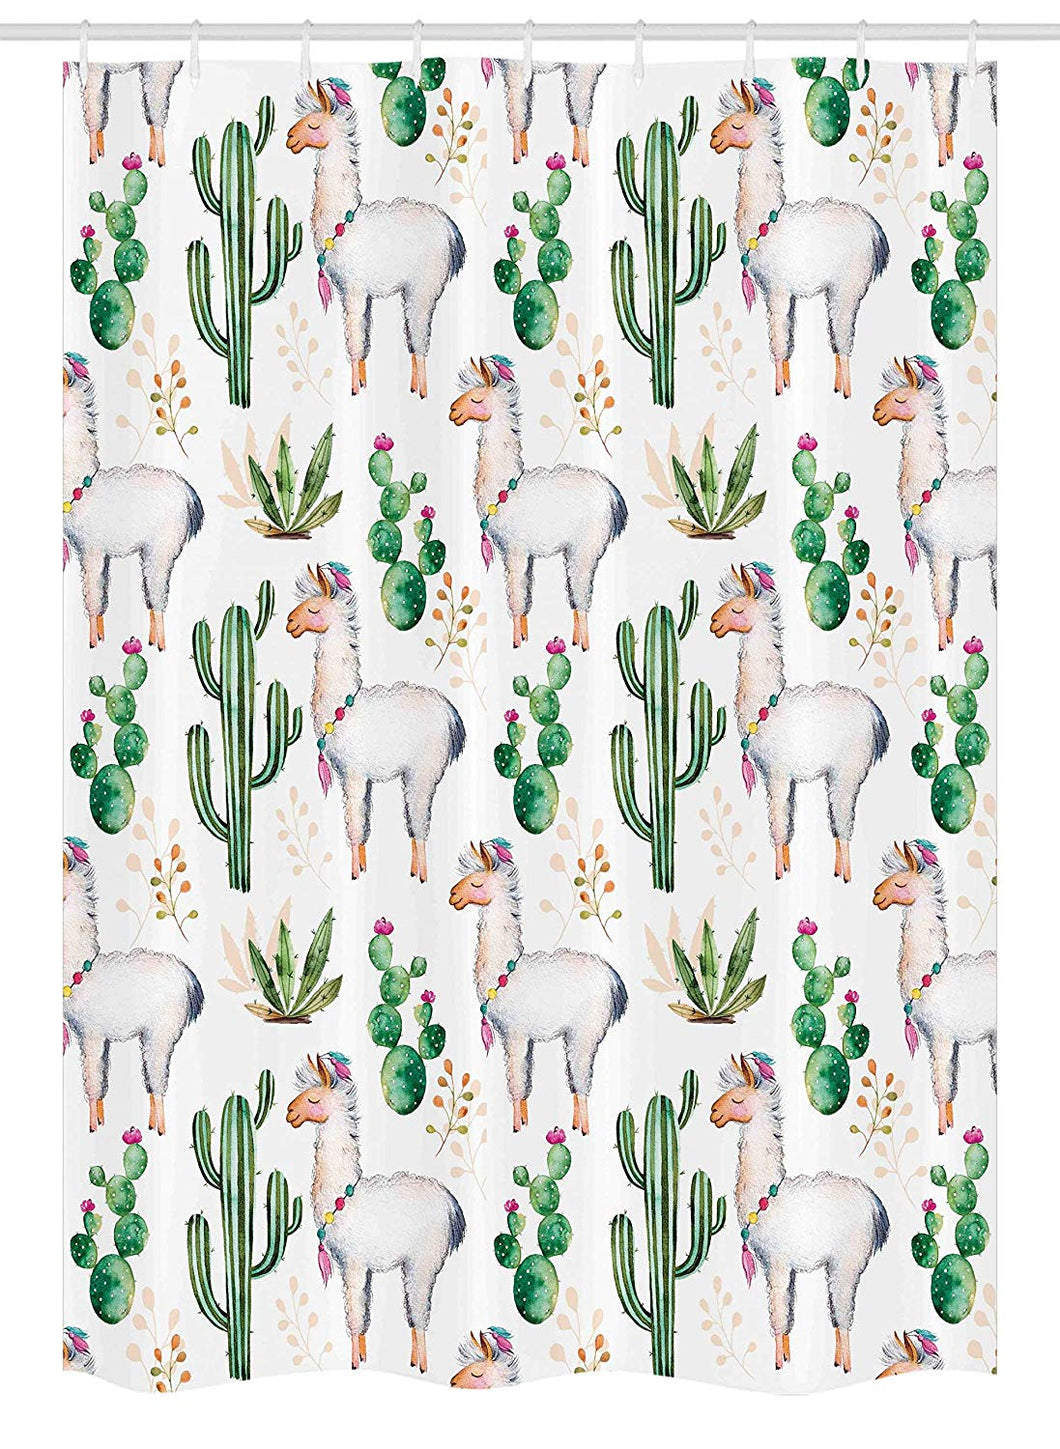 Ambesonne Cactus Stall Shower Curtain, Hot South Desert Plant Cactus Pattern with Camel Animal Modern Colored Image Print, Fabric Bathroom Decor Set with Hooks, 54